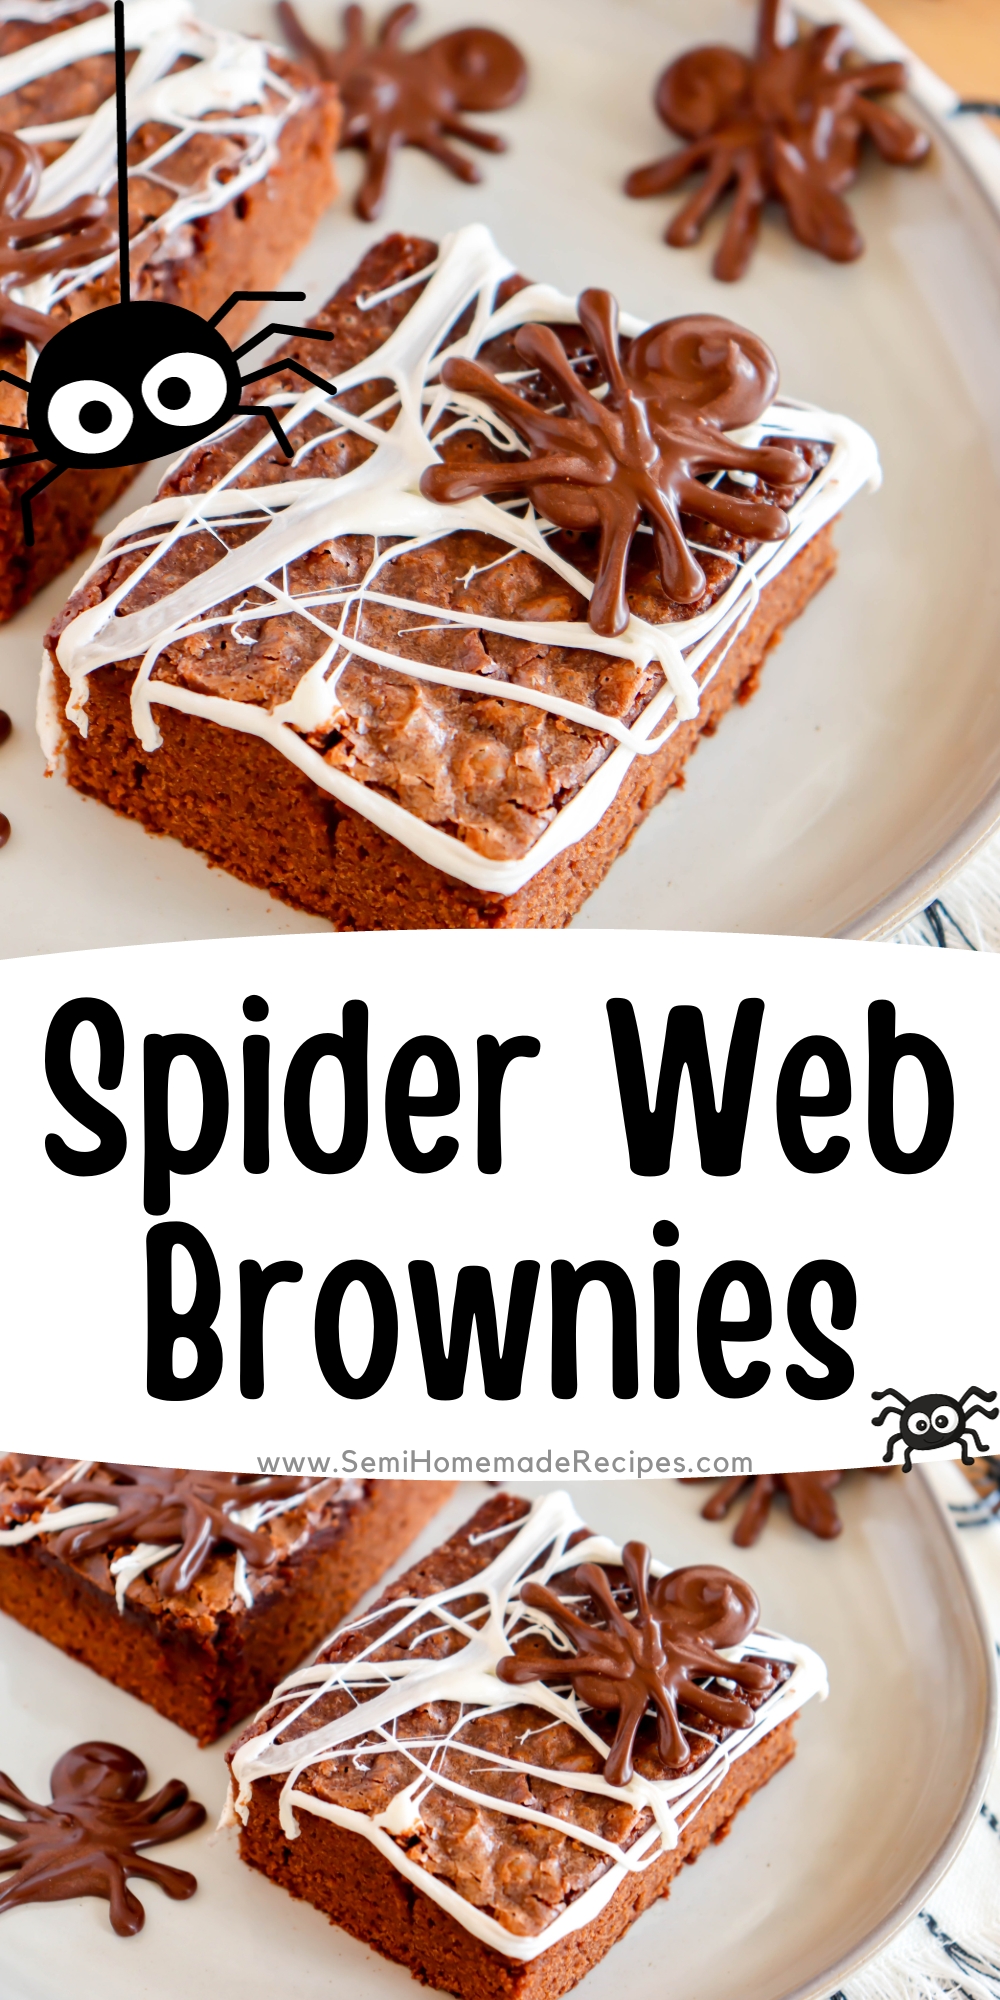 Let these Spider Web Brownies crawl right into your Halloween dreams...errr nightmares! These semihomemade brownies are decorated with marshmallow webs and chocolate spiders for the perfect Halloween treat! 